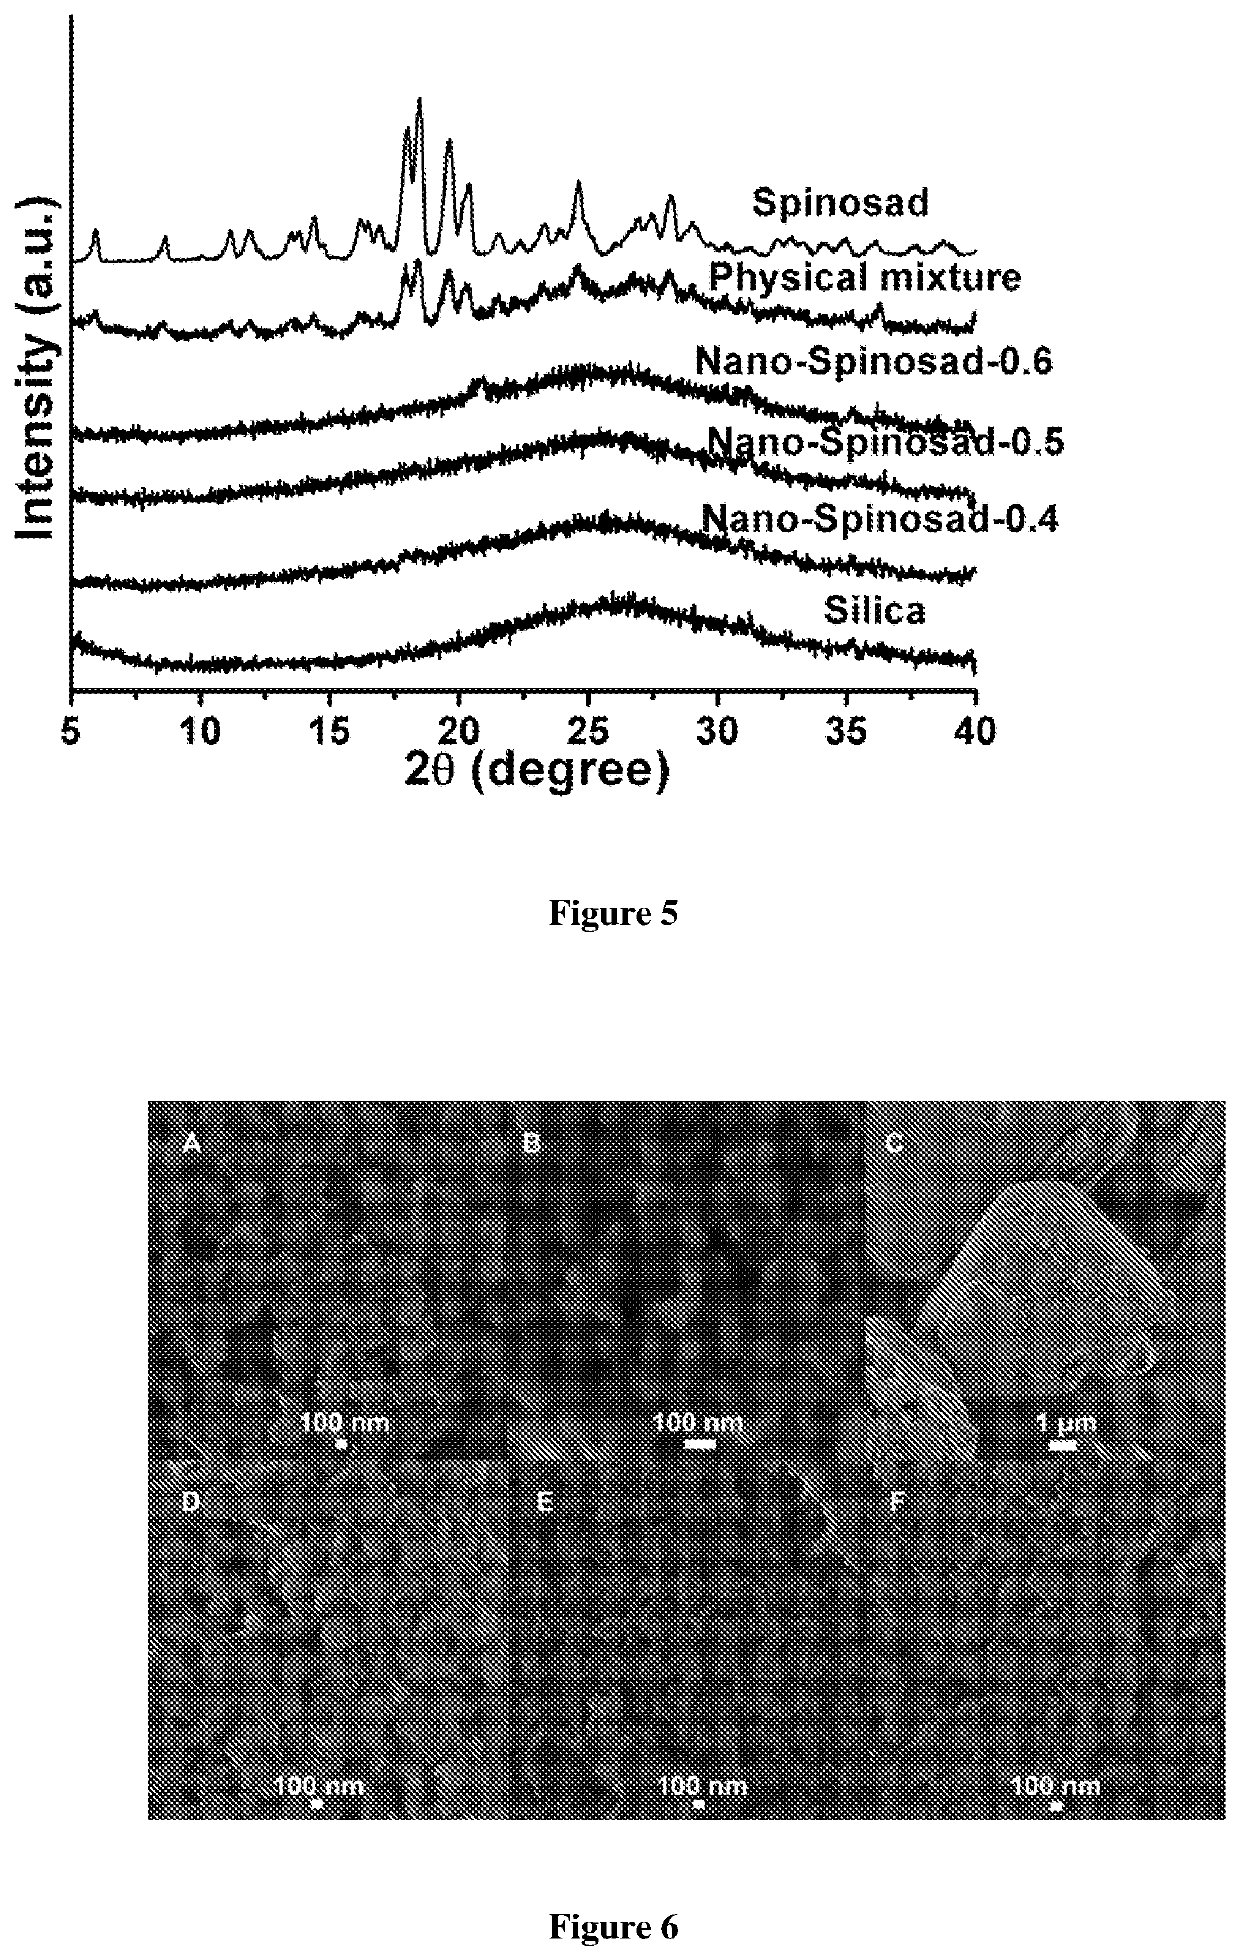 Composition, particulate materials and methods for making particulate materials